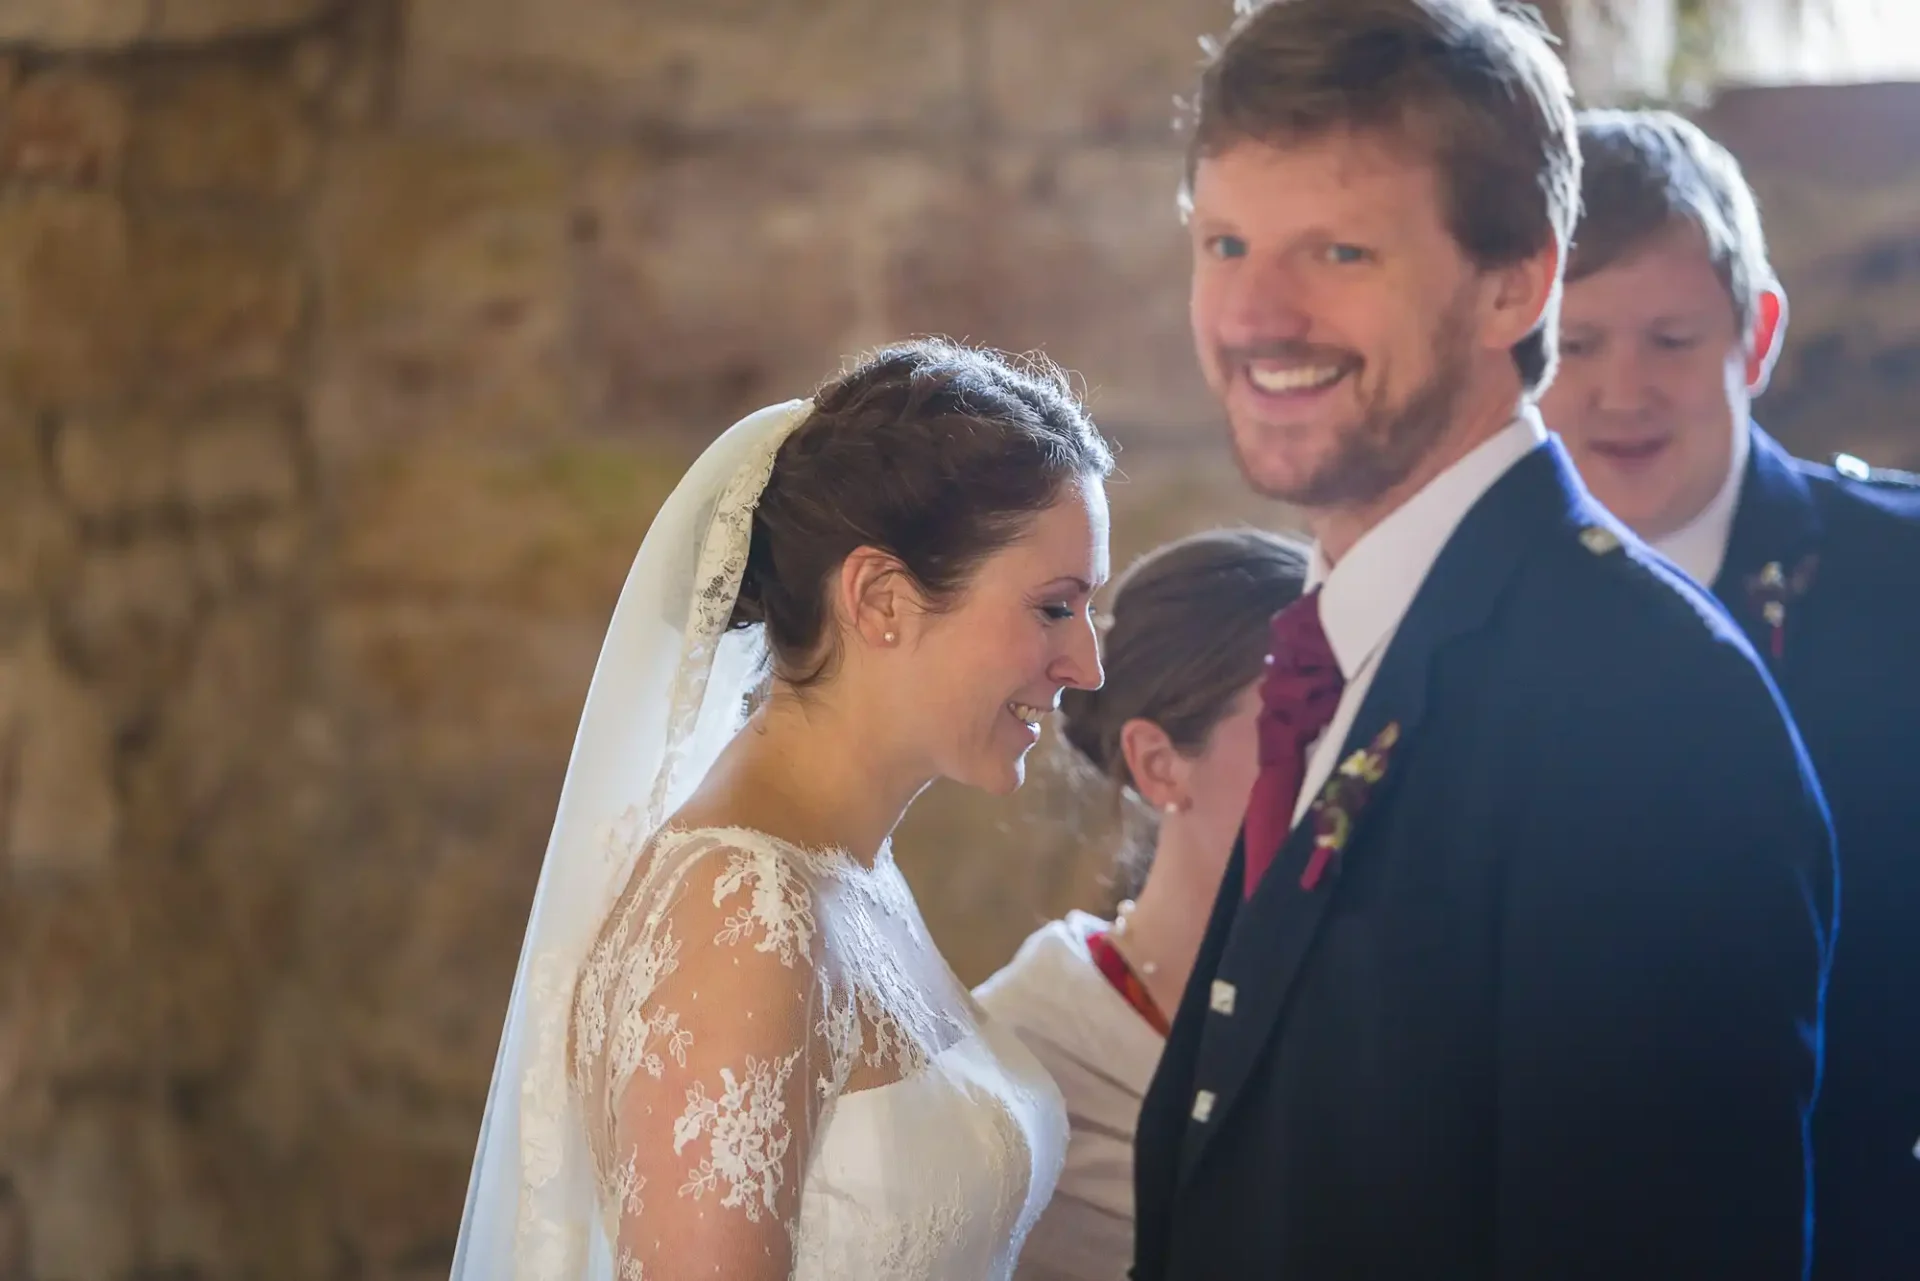 A bride and groom smiling at each other, lit by natural light in an indoor setting, with a guest visible in the background.